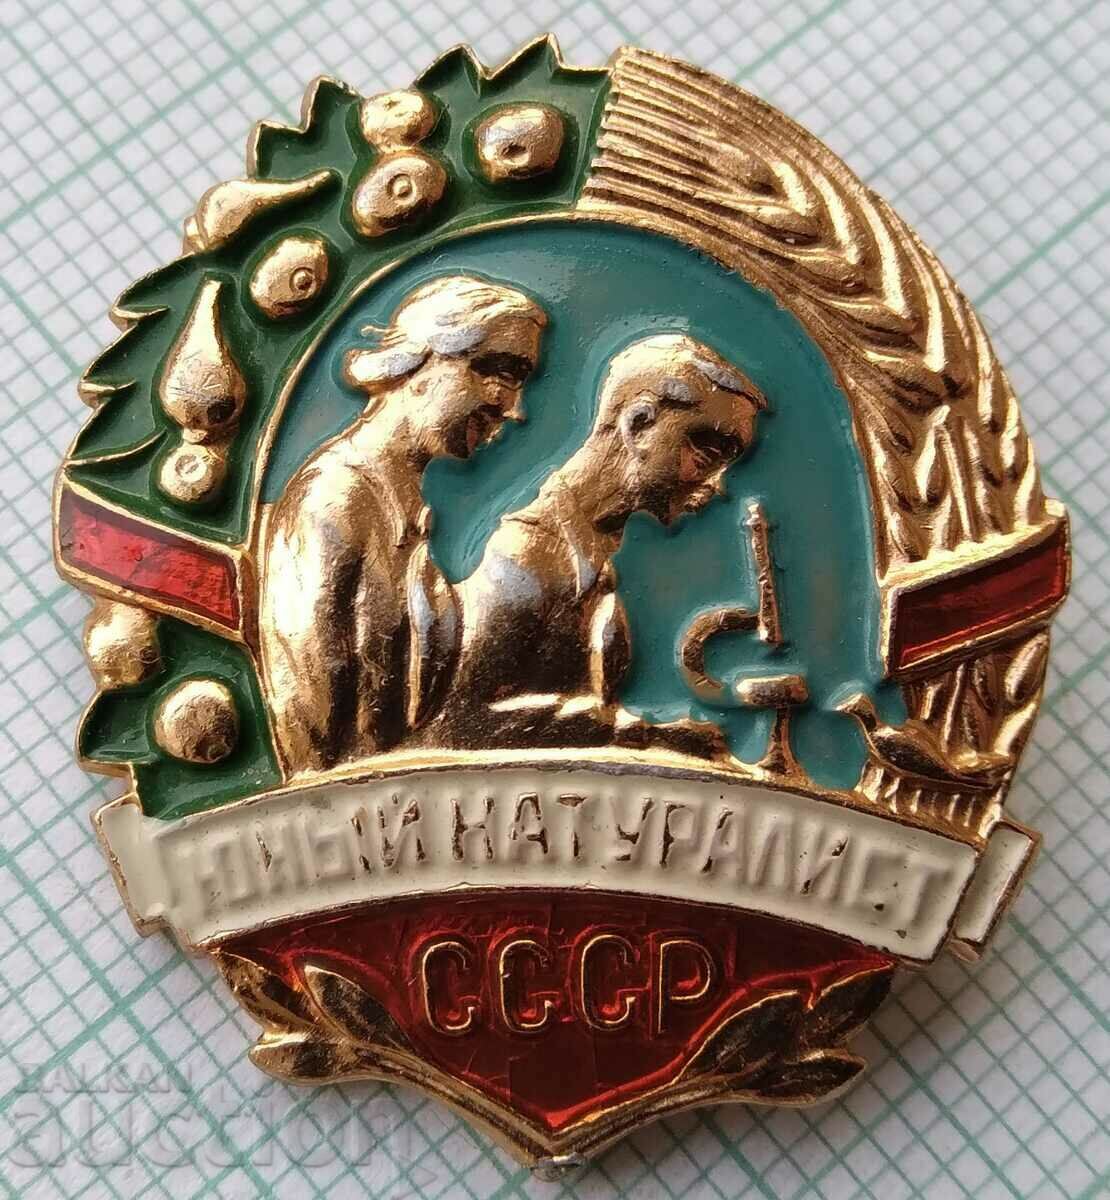 15262 Badge - Young Naturalist USSR